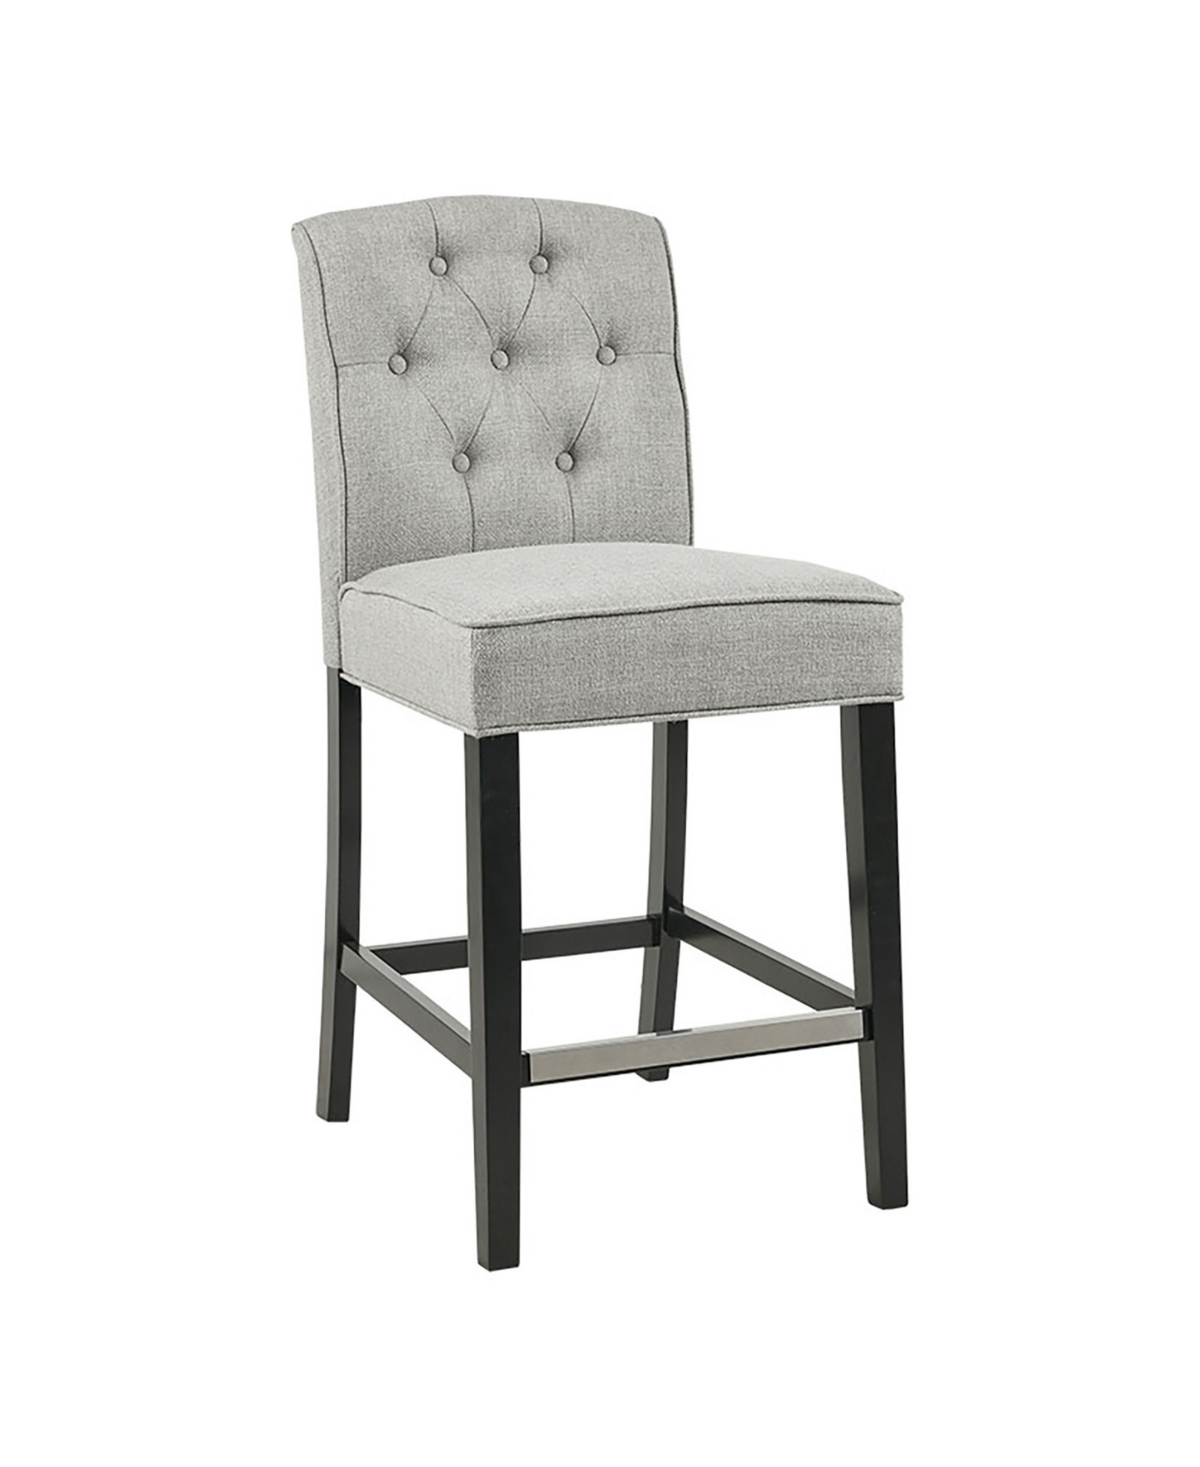 Madison Park Marian 26" Fabric Tufted Counter Stool In Light Gray